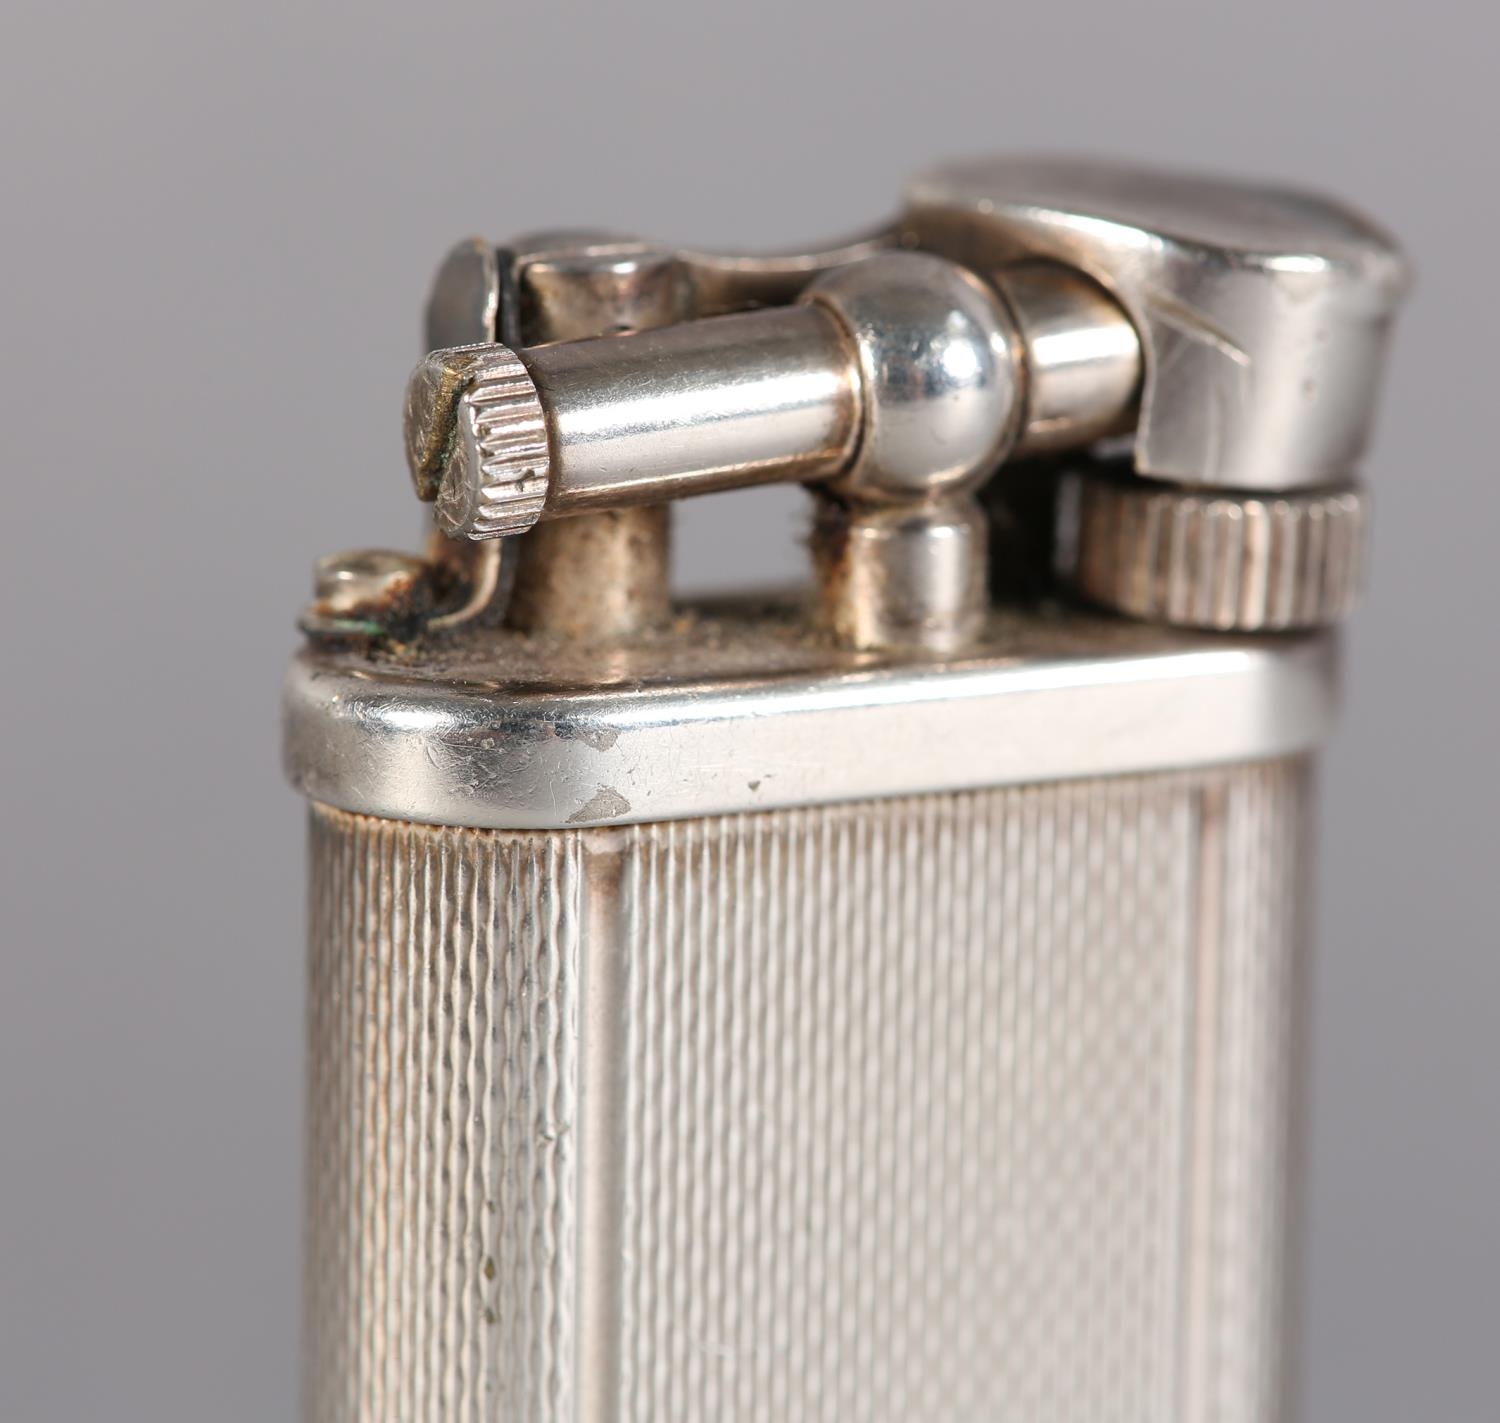 A DUNHILL 'UNIQUE' LIFT ARM PETROL LIGHTER No. 484316 engine turned, silver plated, signed and - Image 4 of 6